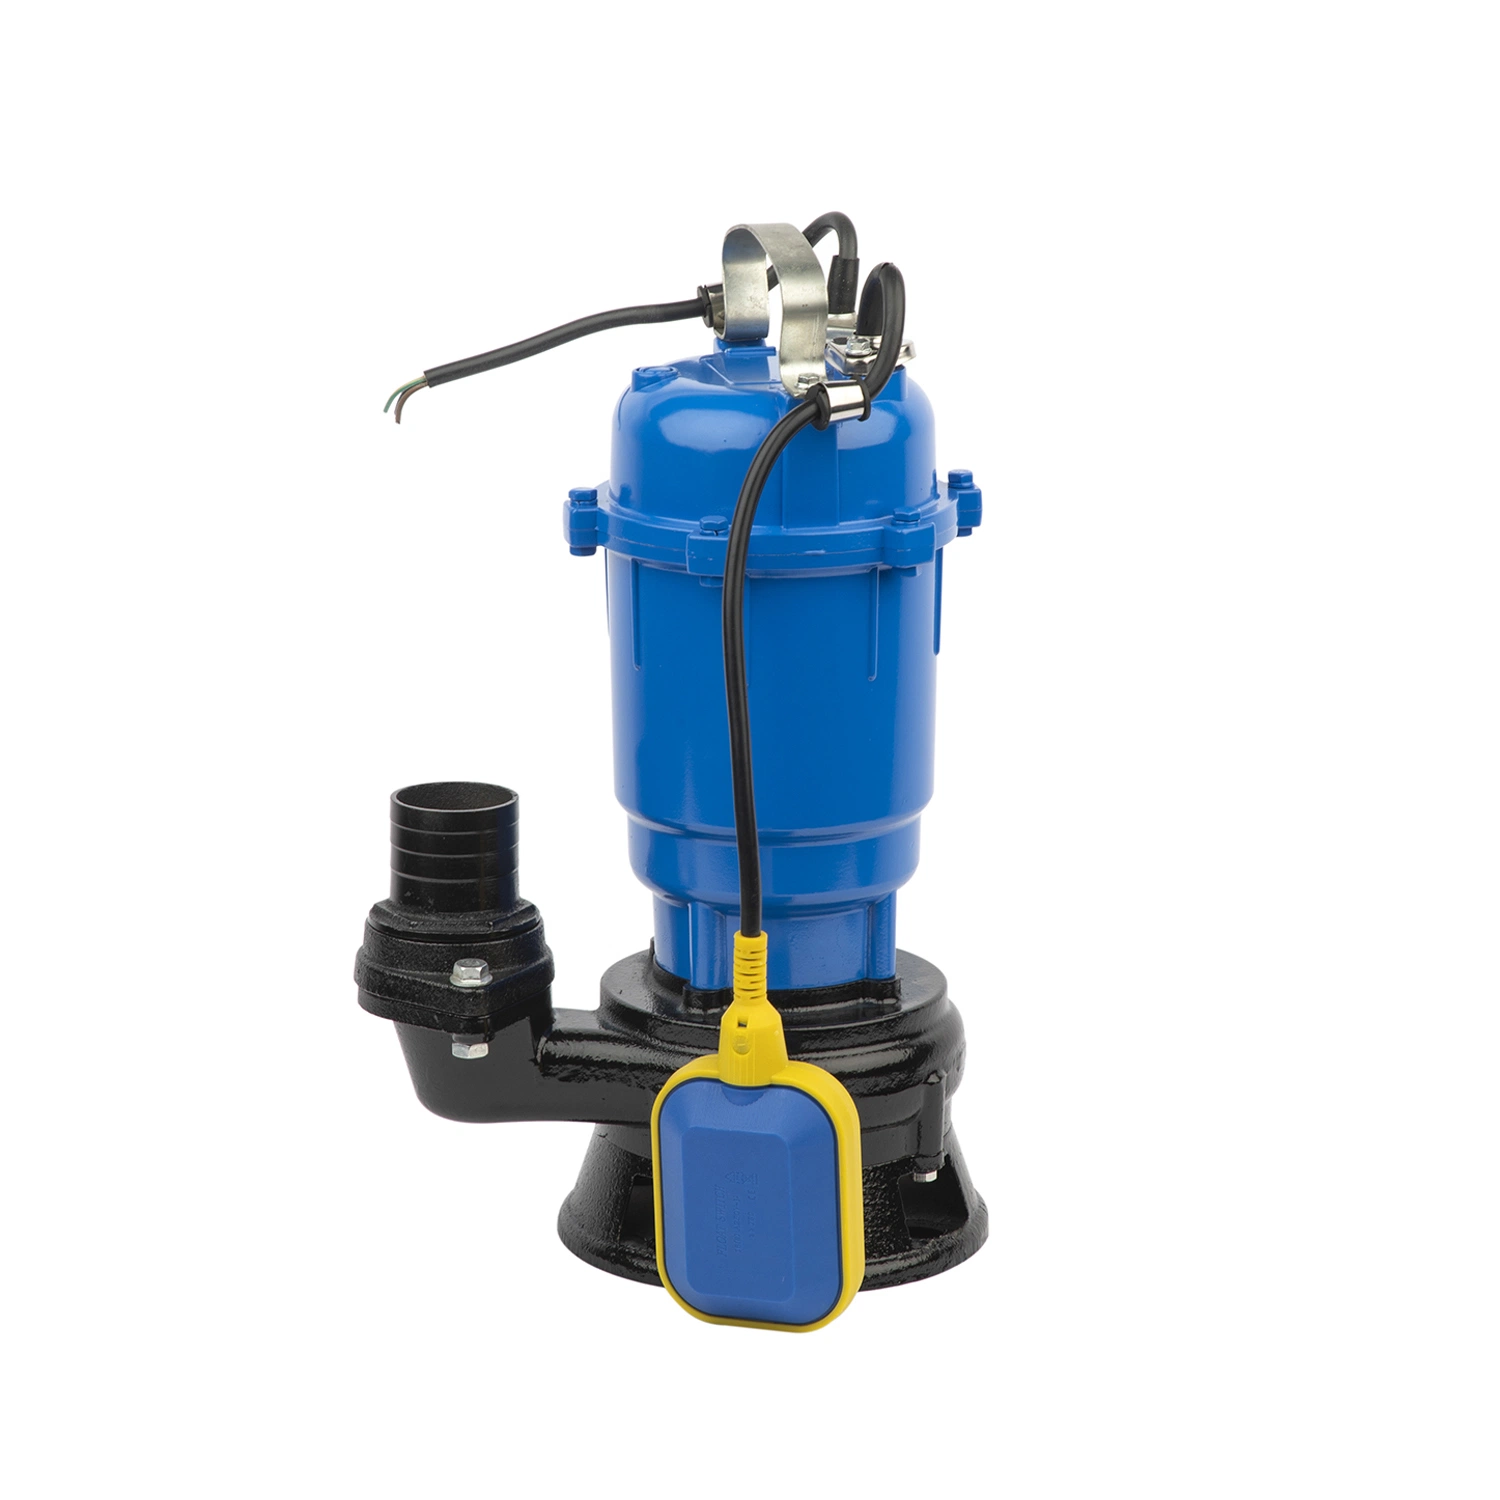 0.75HP Waste Dirty Water Pumps Grinder Cutter Dewatering Centrifugal Submersible Sewage Pump